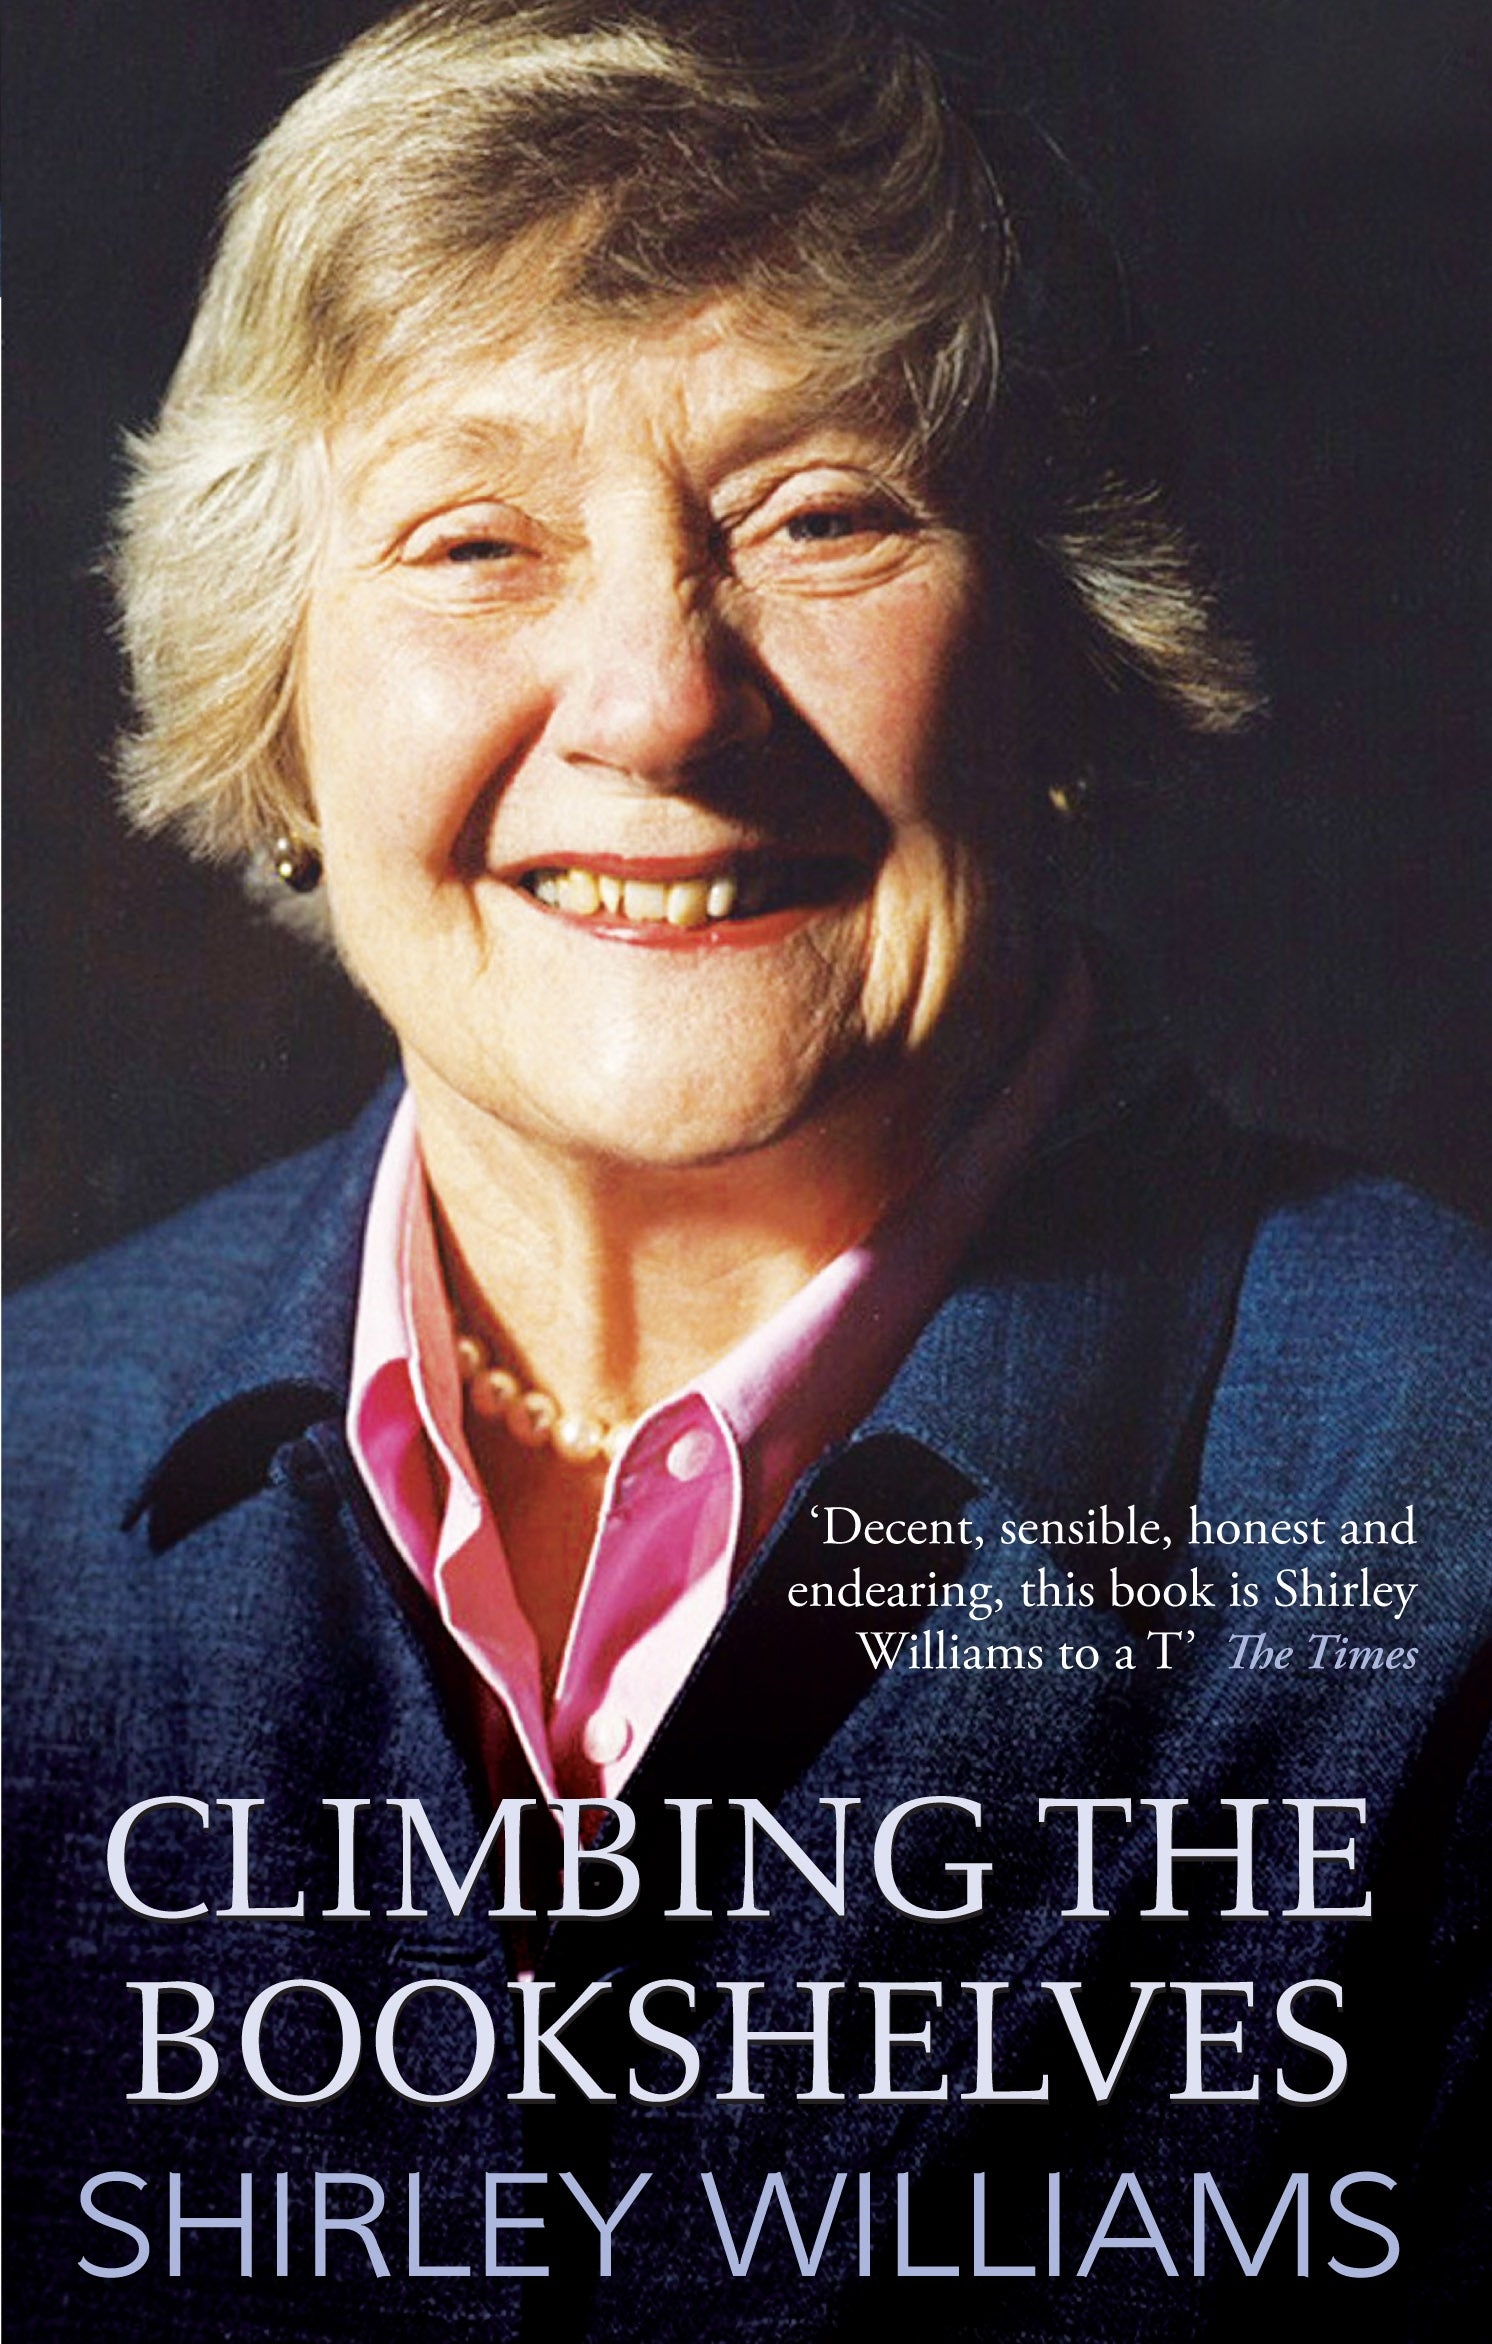 Climbing The Bookshelves by Shirley Williams